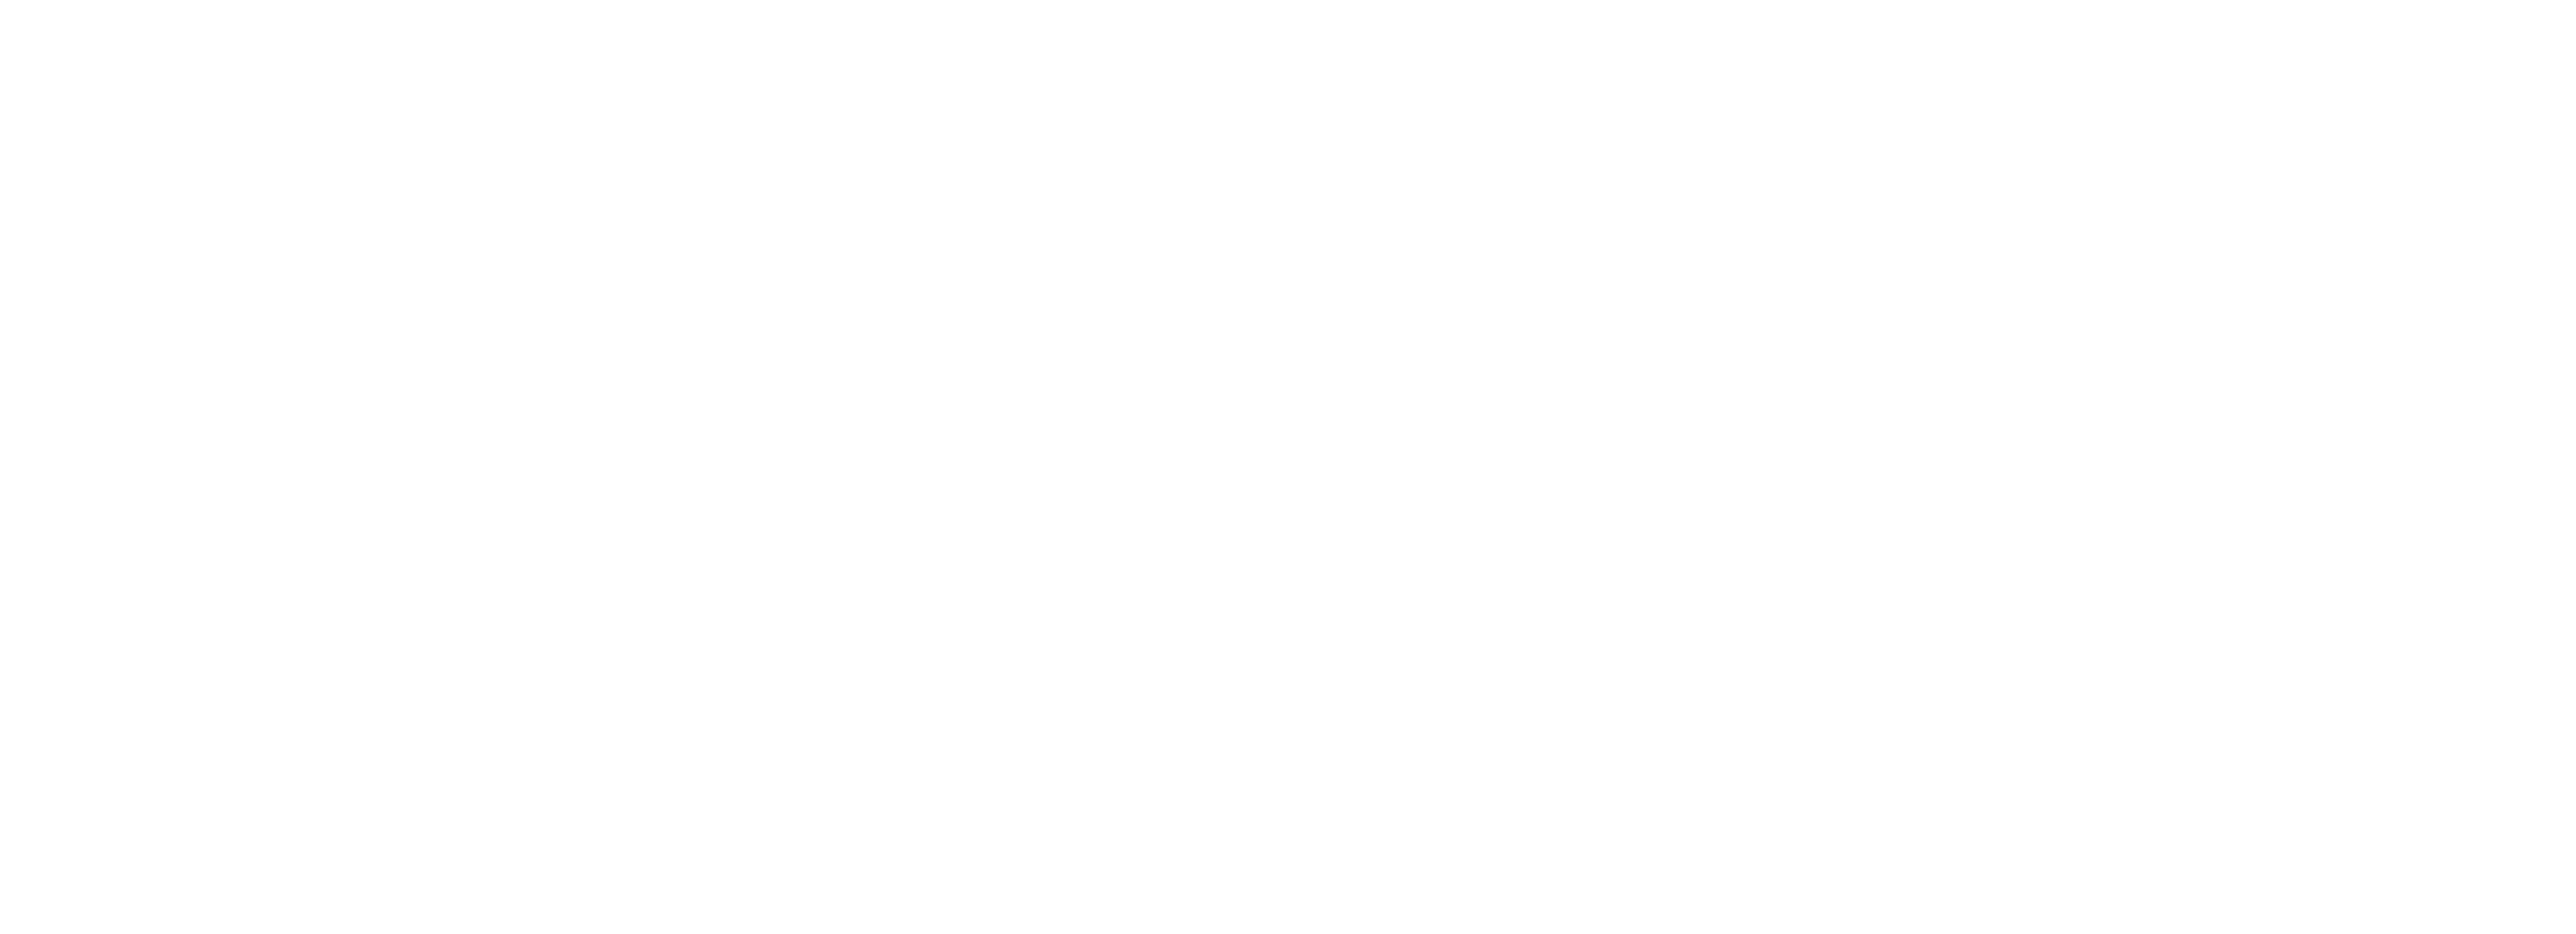 inhubble by innusual